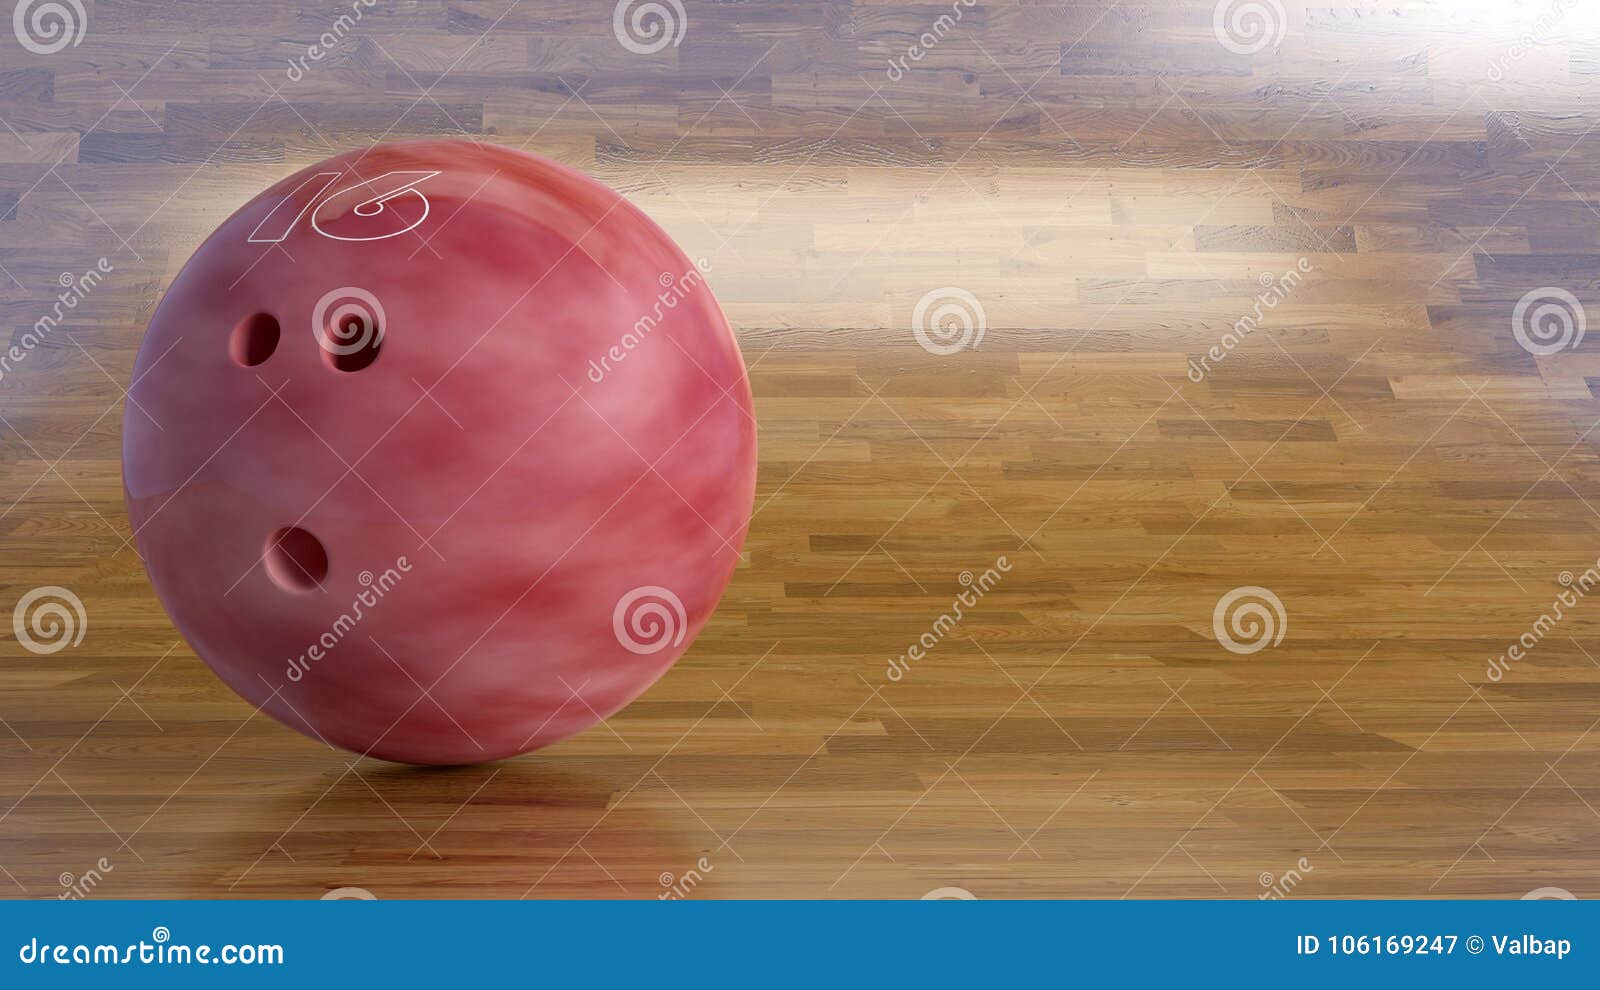 bowling ball number 16 on a shinning wood floor